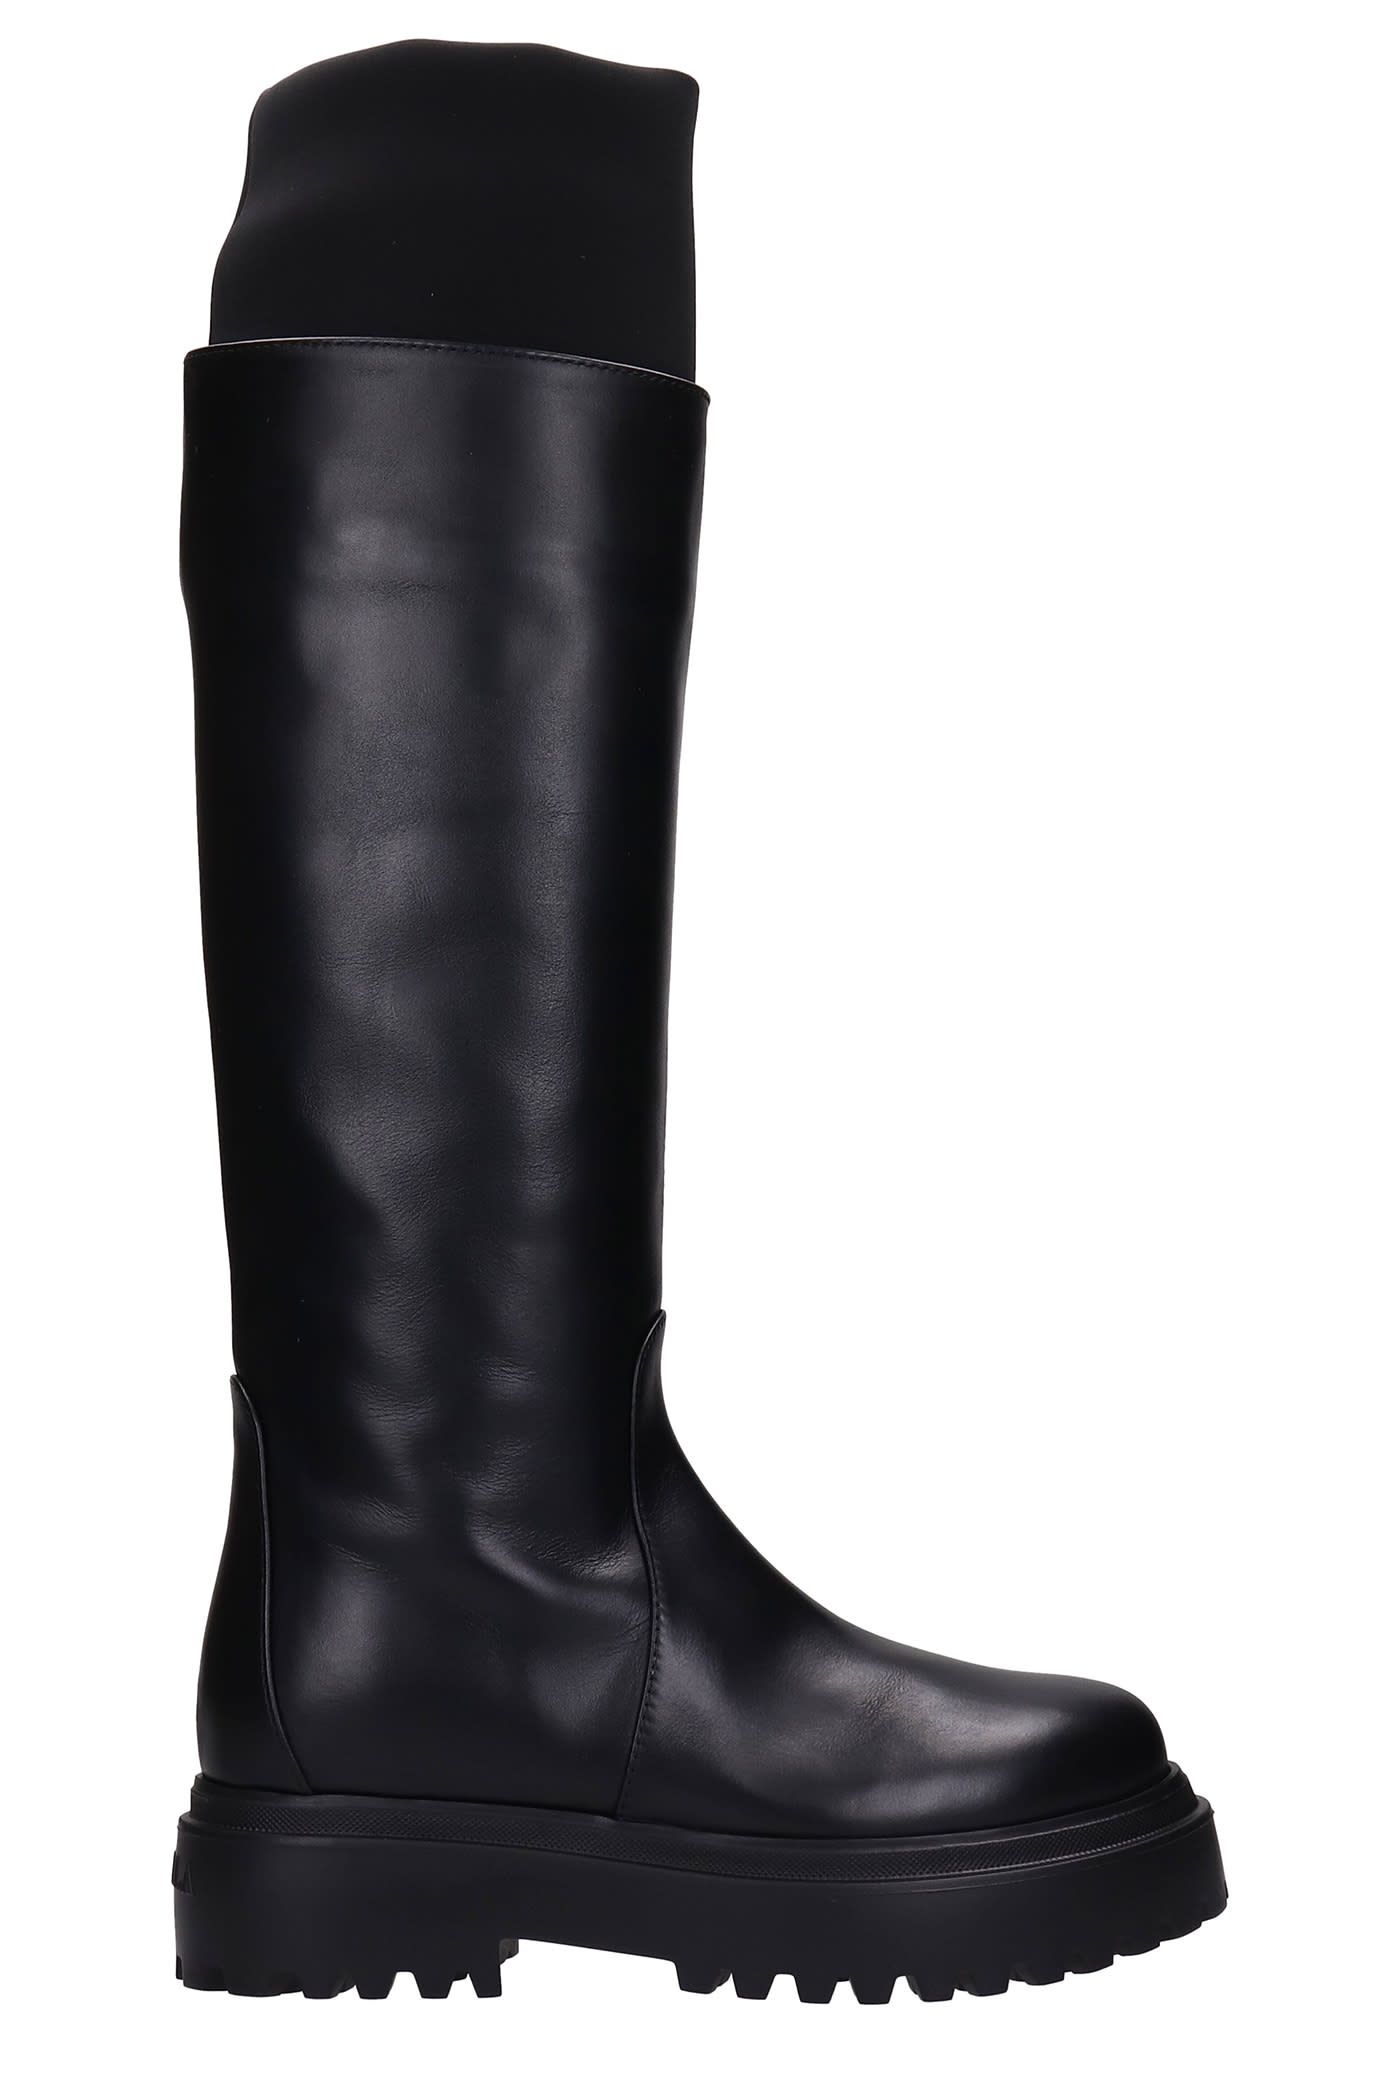 Le Silla Boots In Black Leather